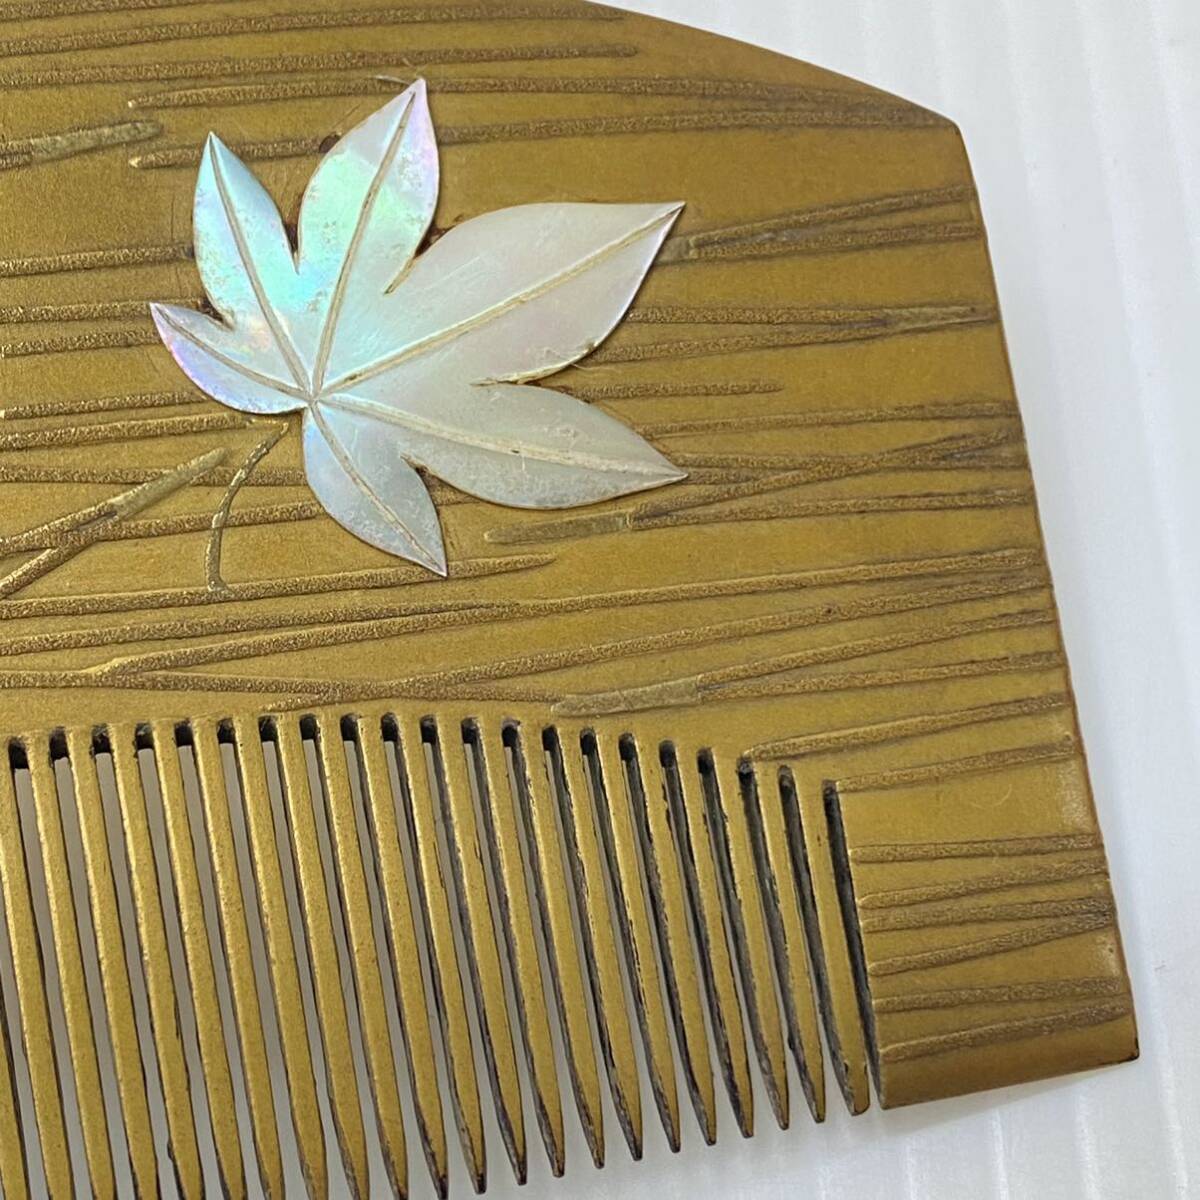  era thing wooden gold lacqering gold ... antique hair ornament comb kimono small articles antique collection old house warehouse .